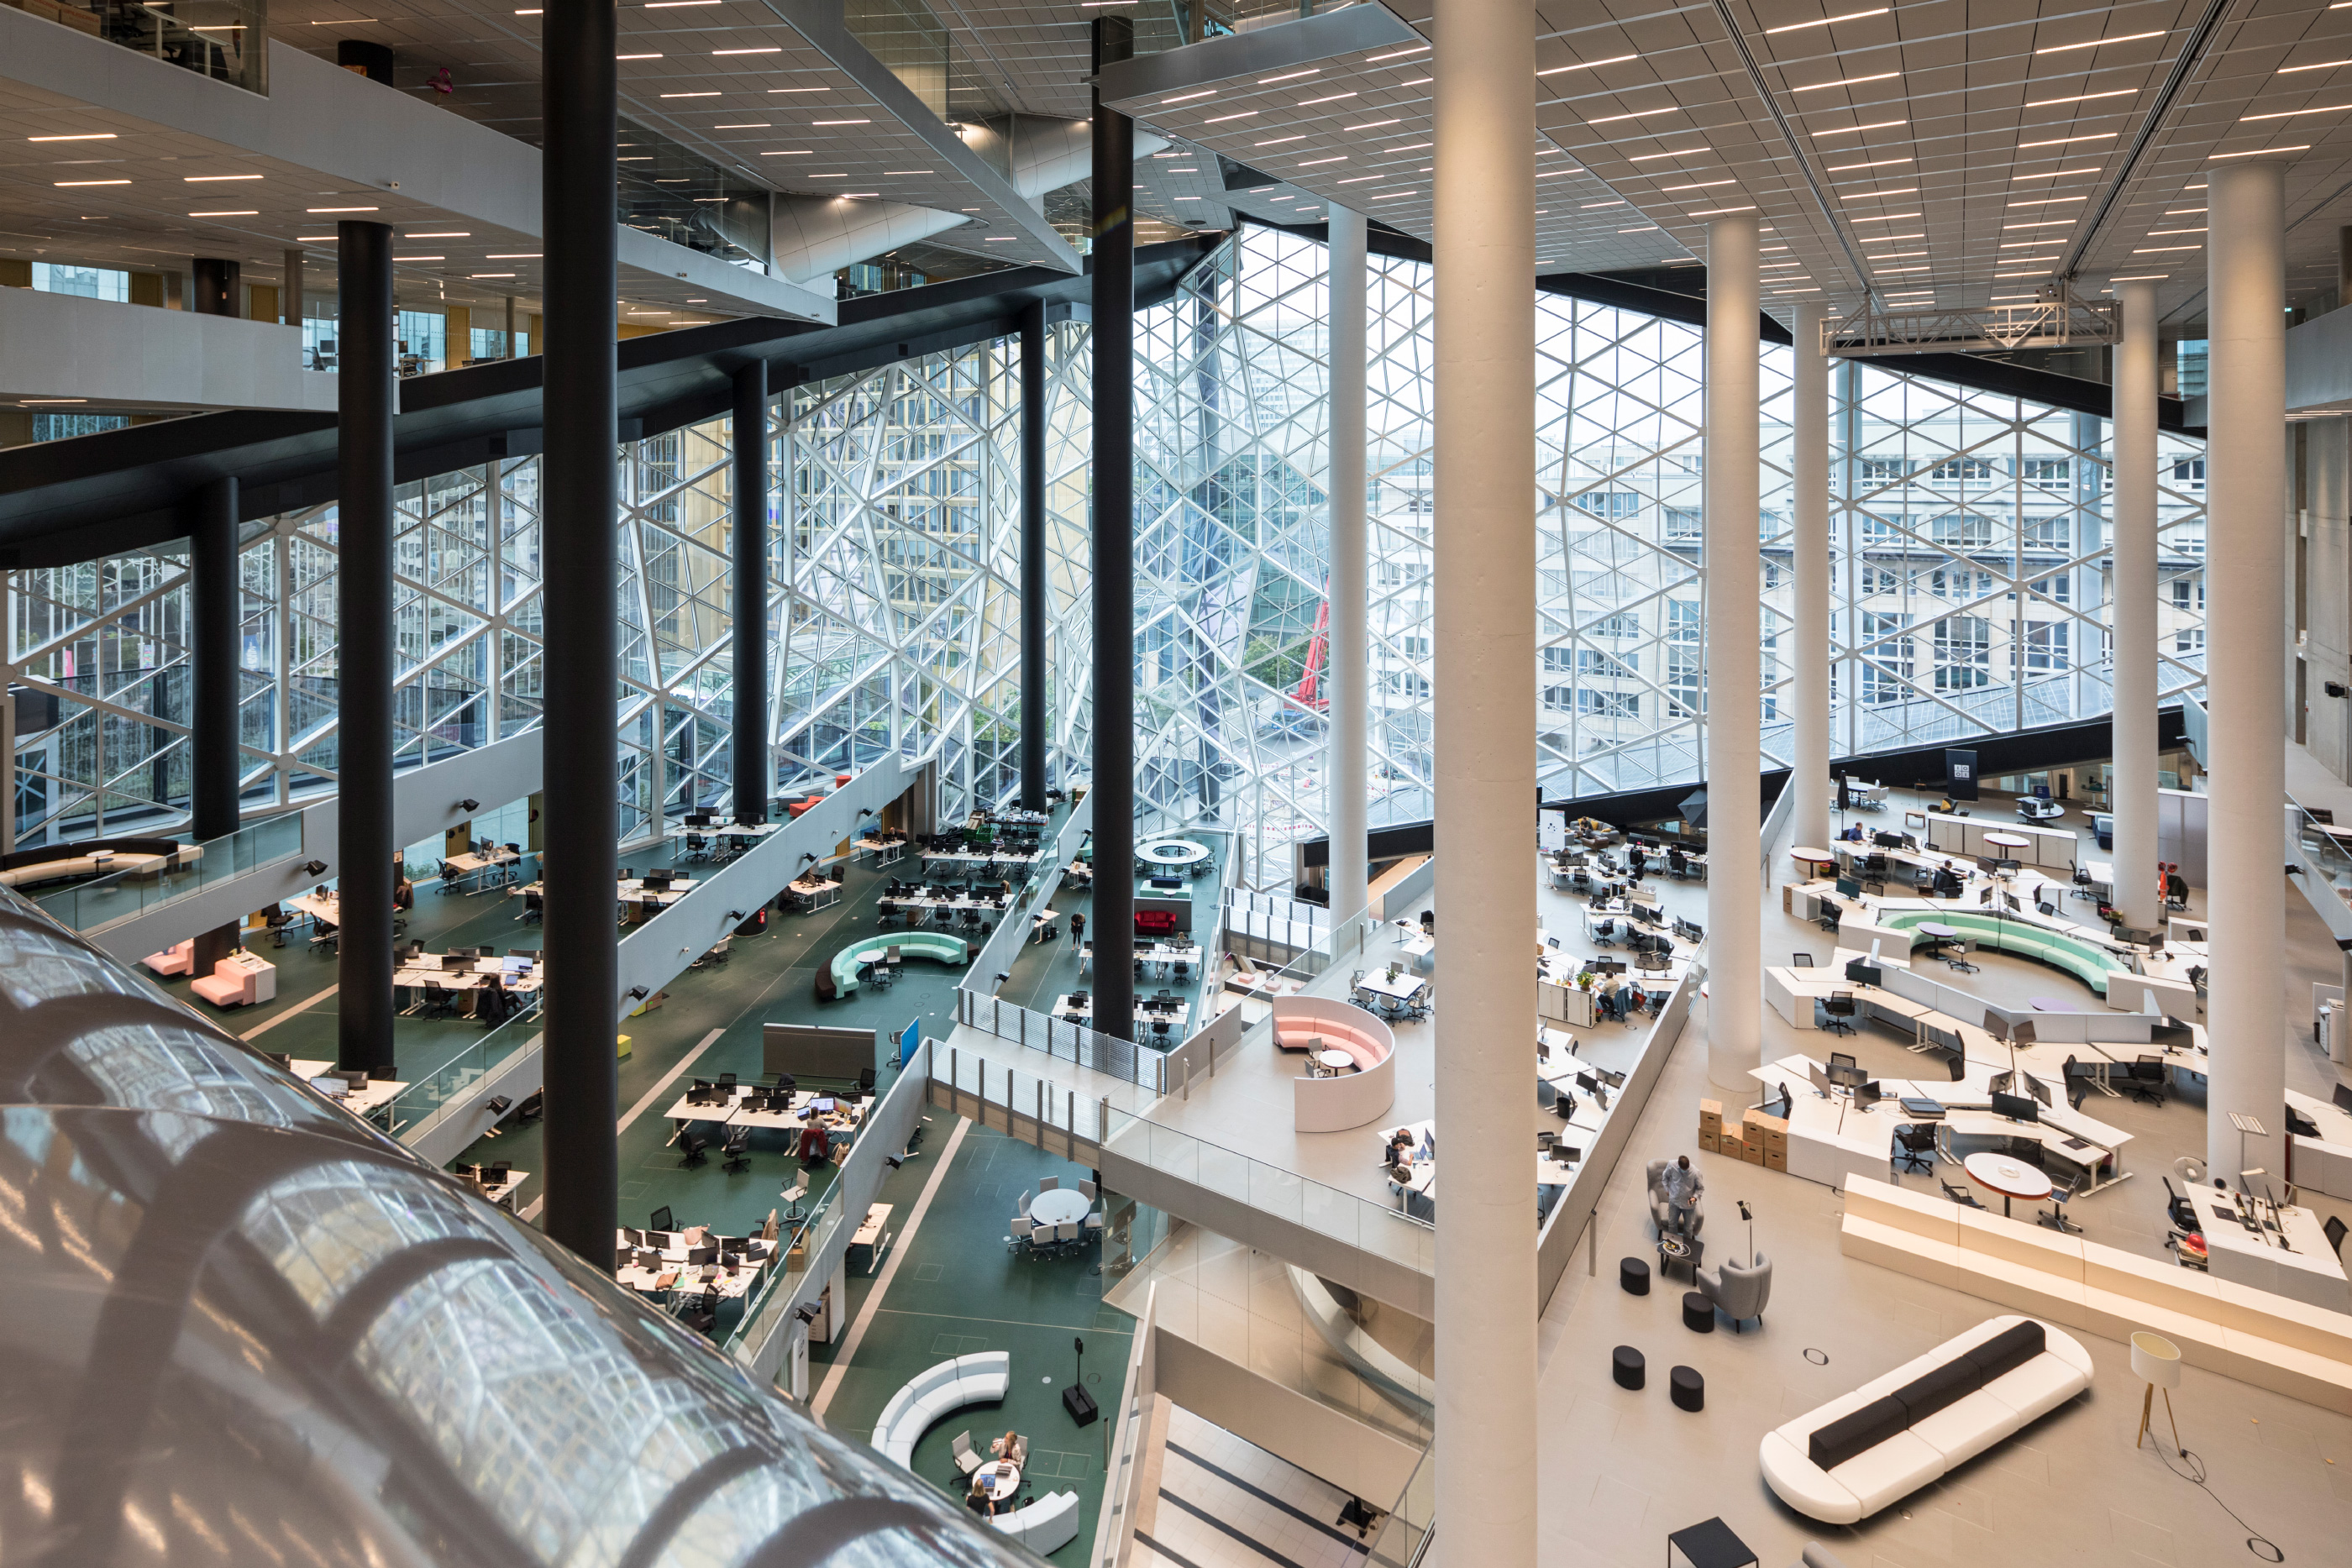 Interior of the new Axel Springer building looking out to a diamond shaped atrium